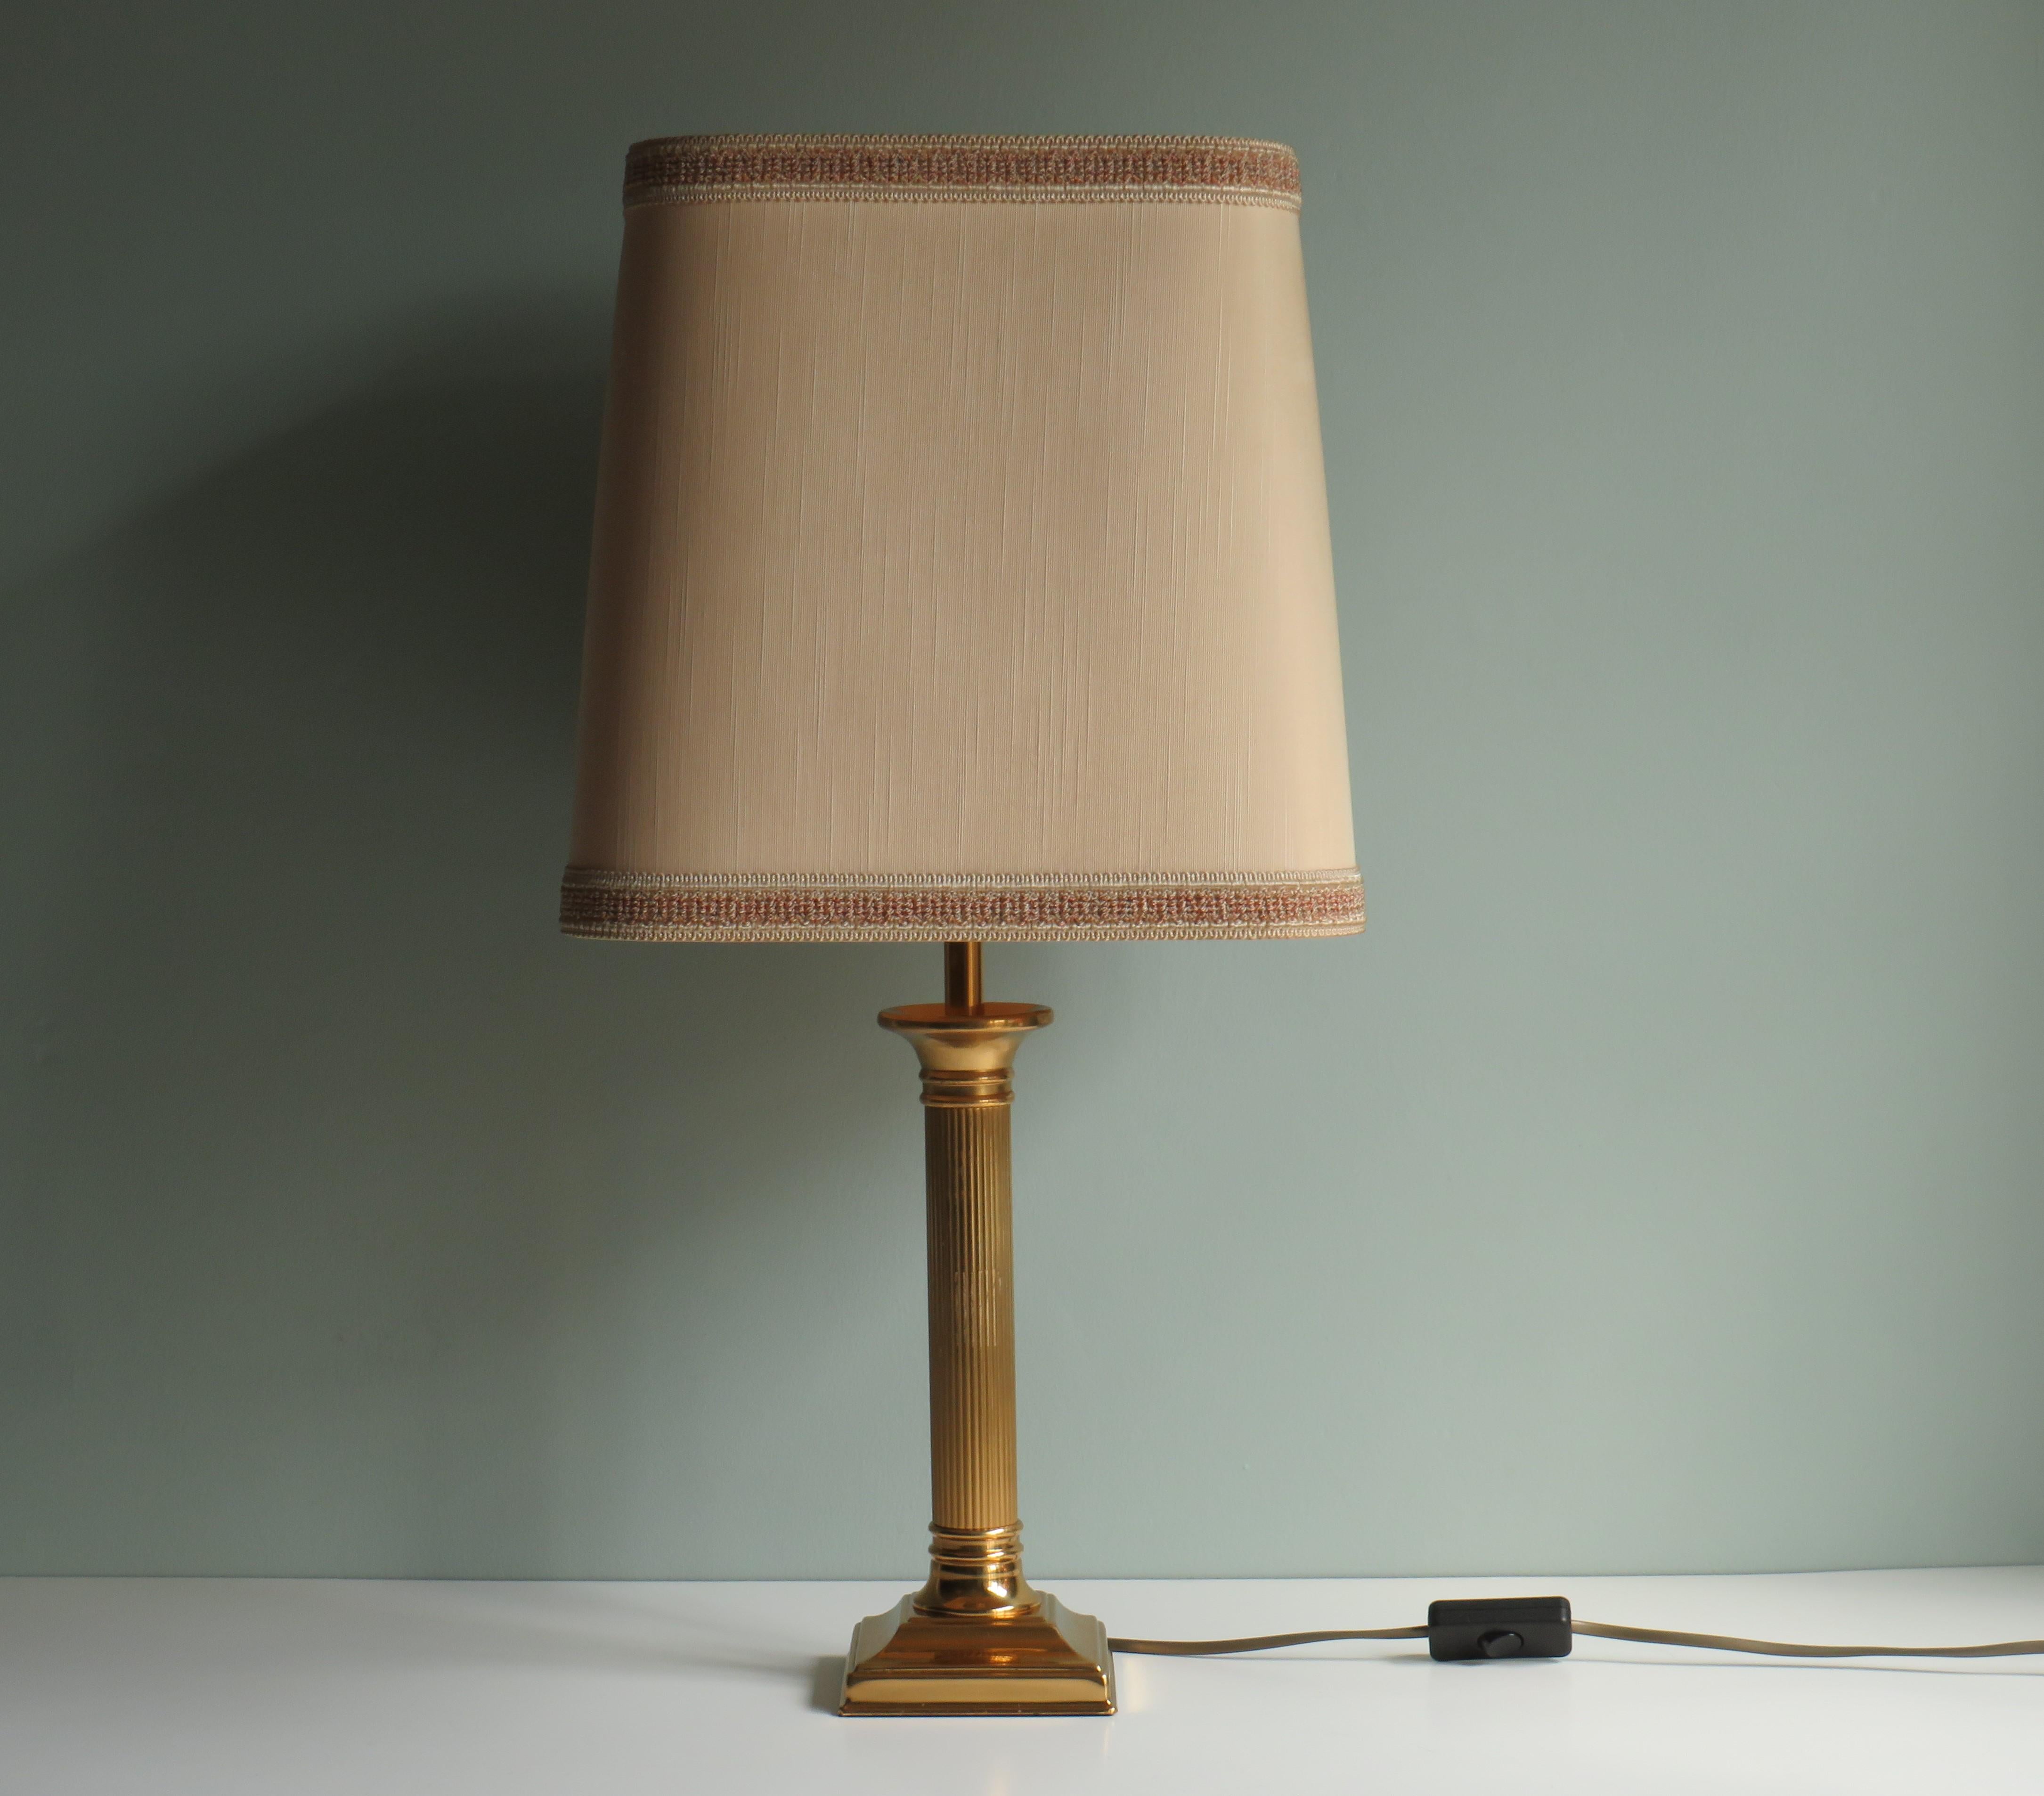 Stylish table lamp by Deknudt, Belgium 1970s.
The lamp has a beautiful original square lamp shade and a brass base with an E 27 fitting.
The Deknudt company was founded in 1956 and is still active, and still produces items with great care for